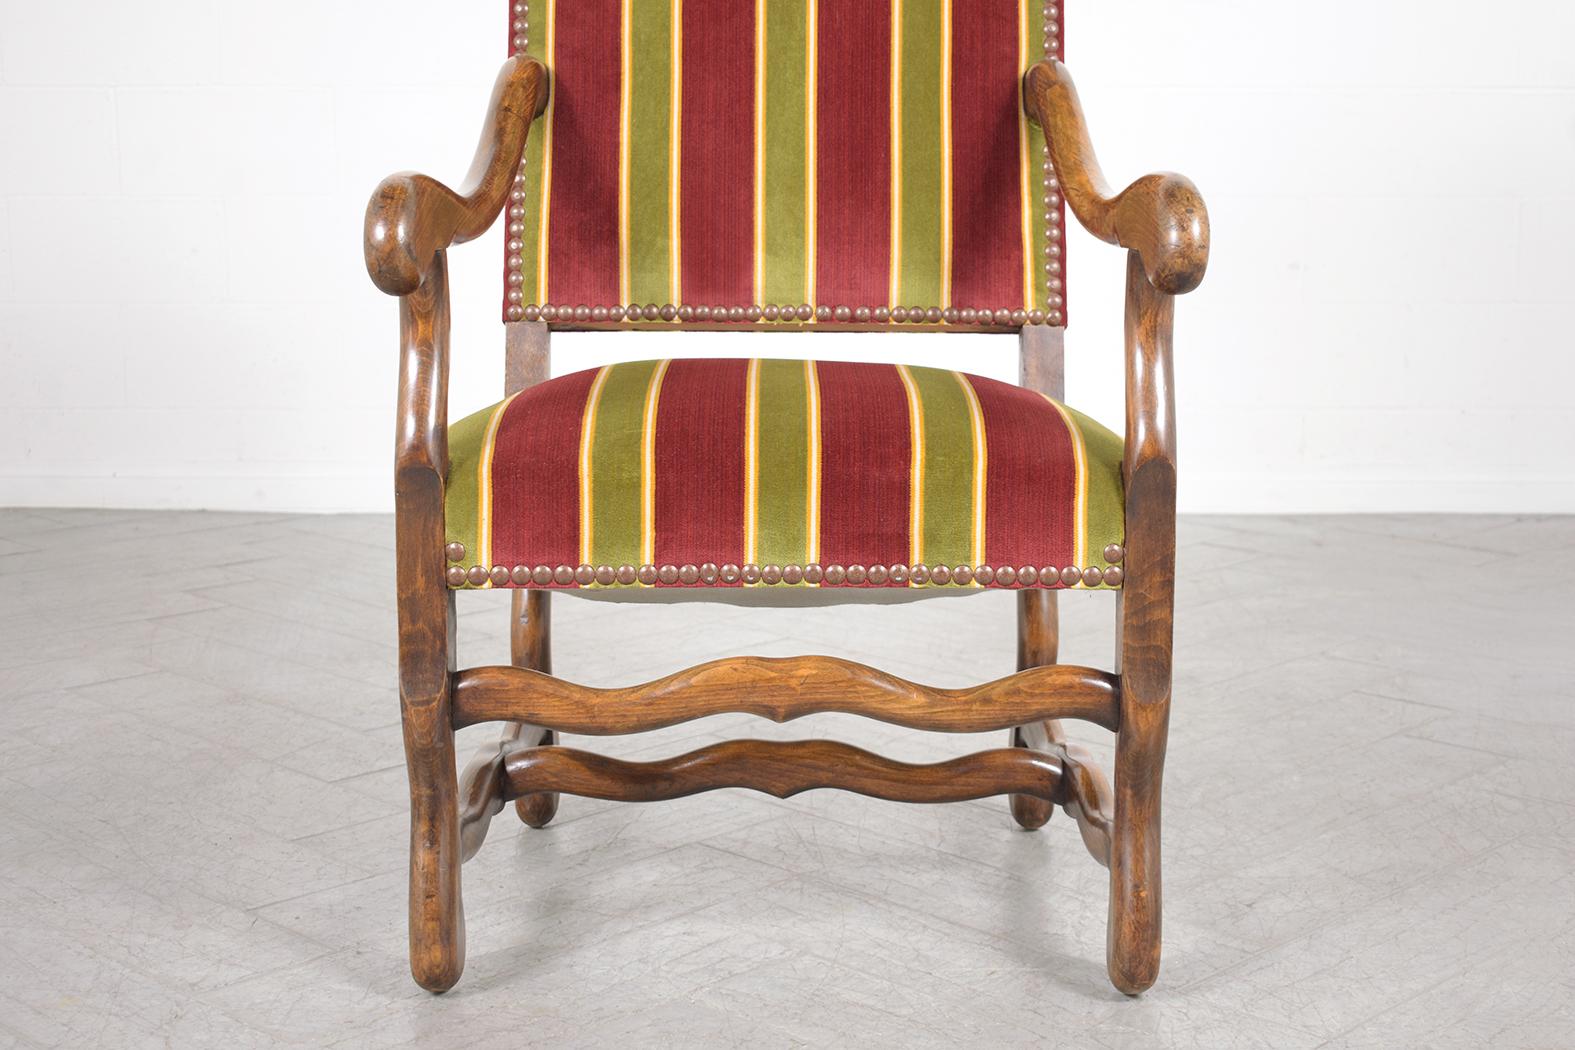 19th Century French Armchairs: Dark Walnut Finish with Striped Velvet Upholstery For Sale 3